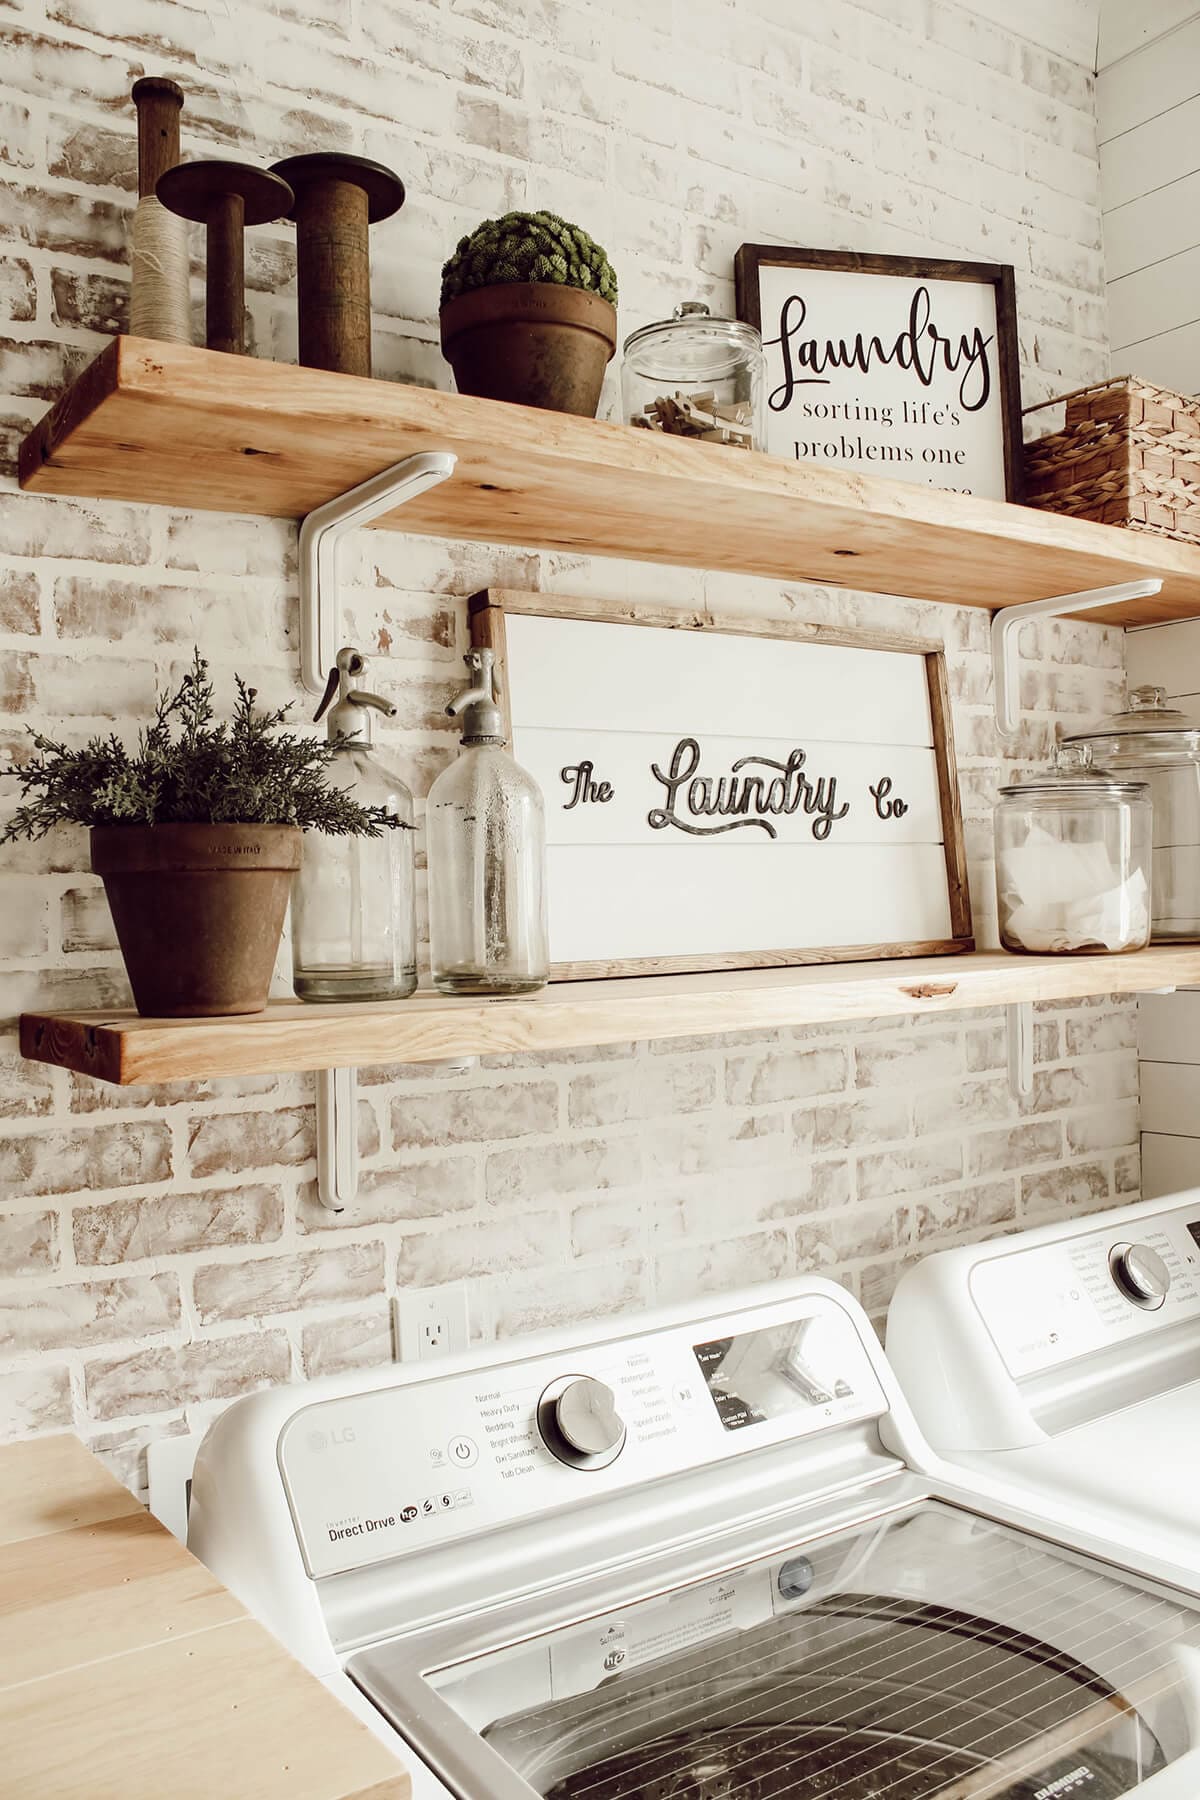 29 ideas to decorate your laundry room in vintage style - 67